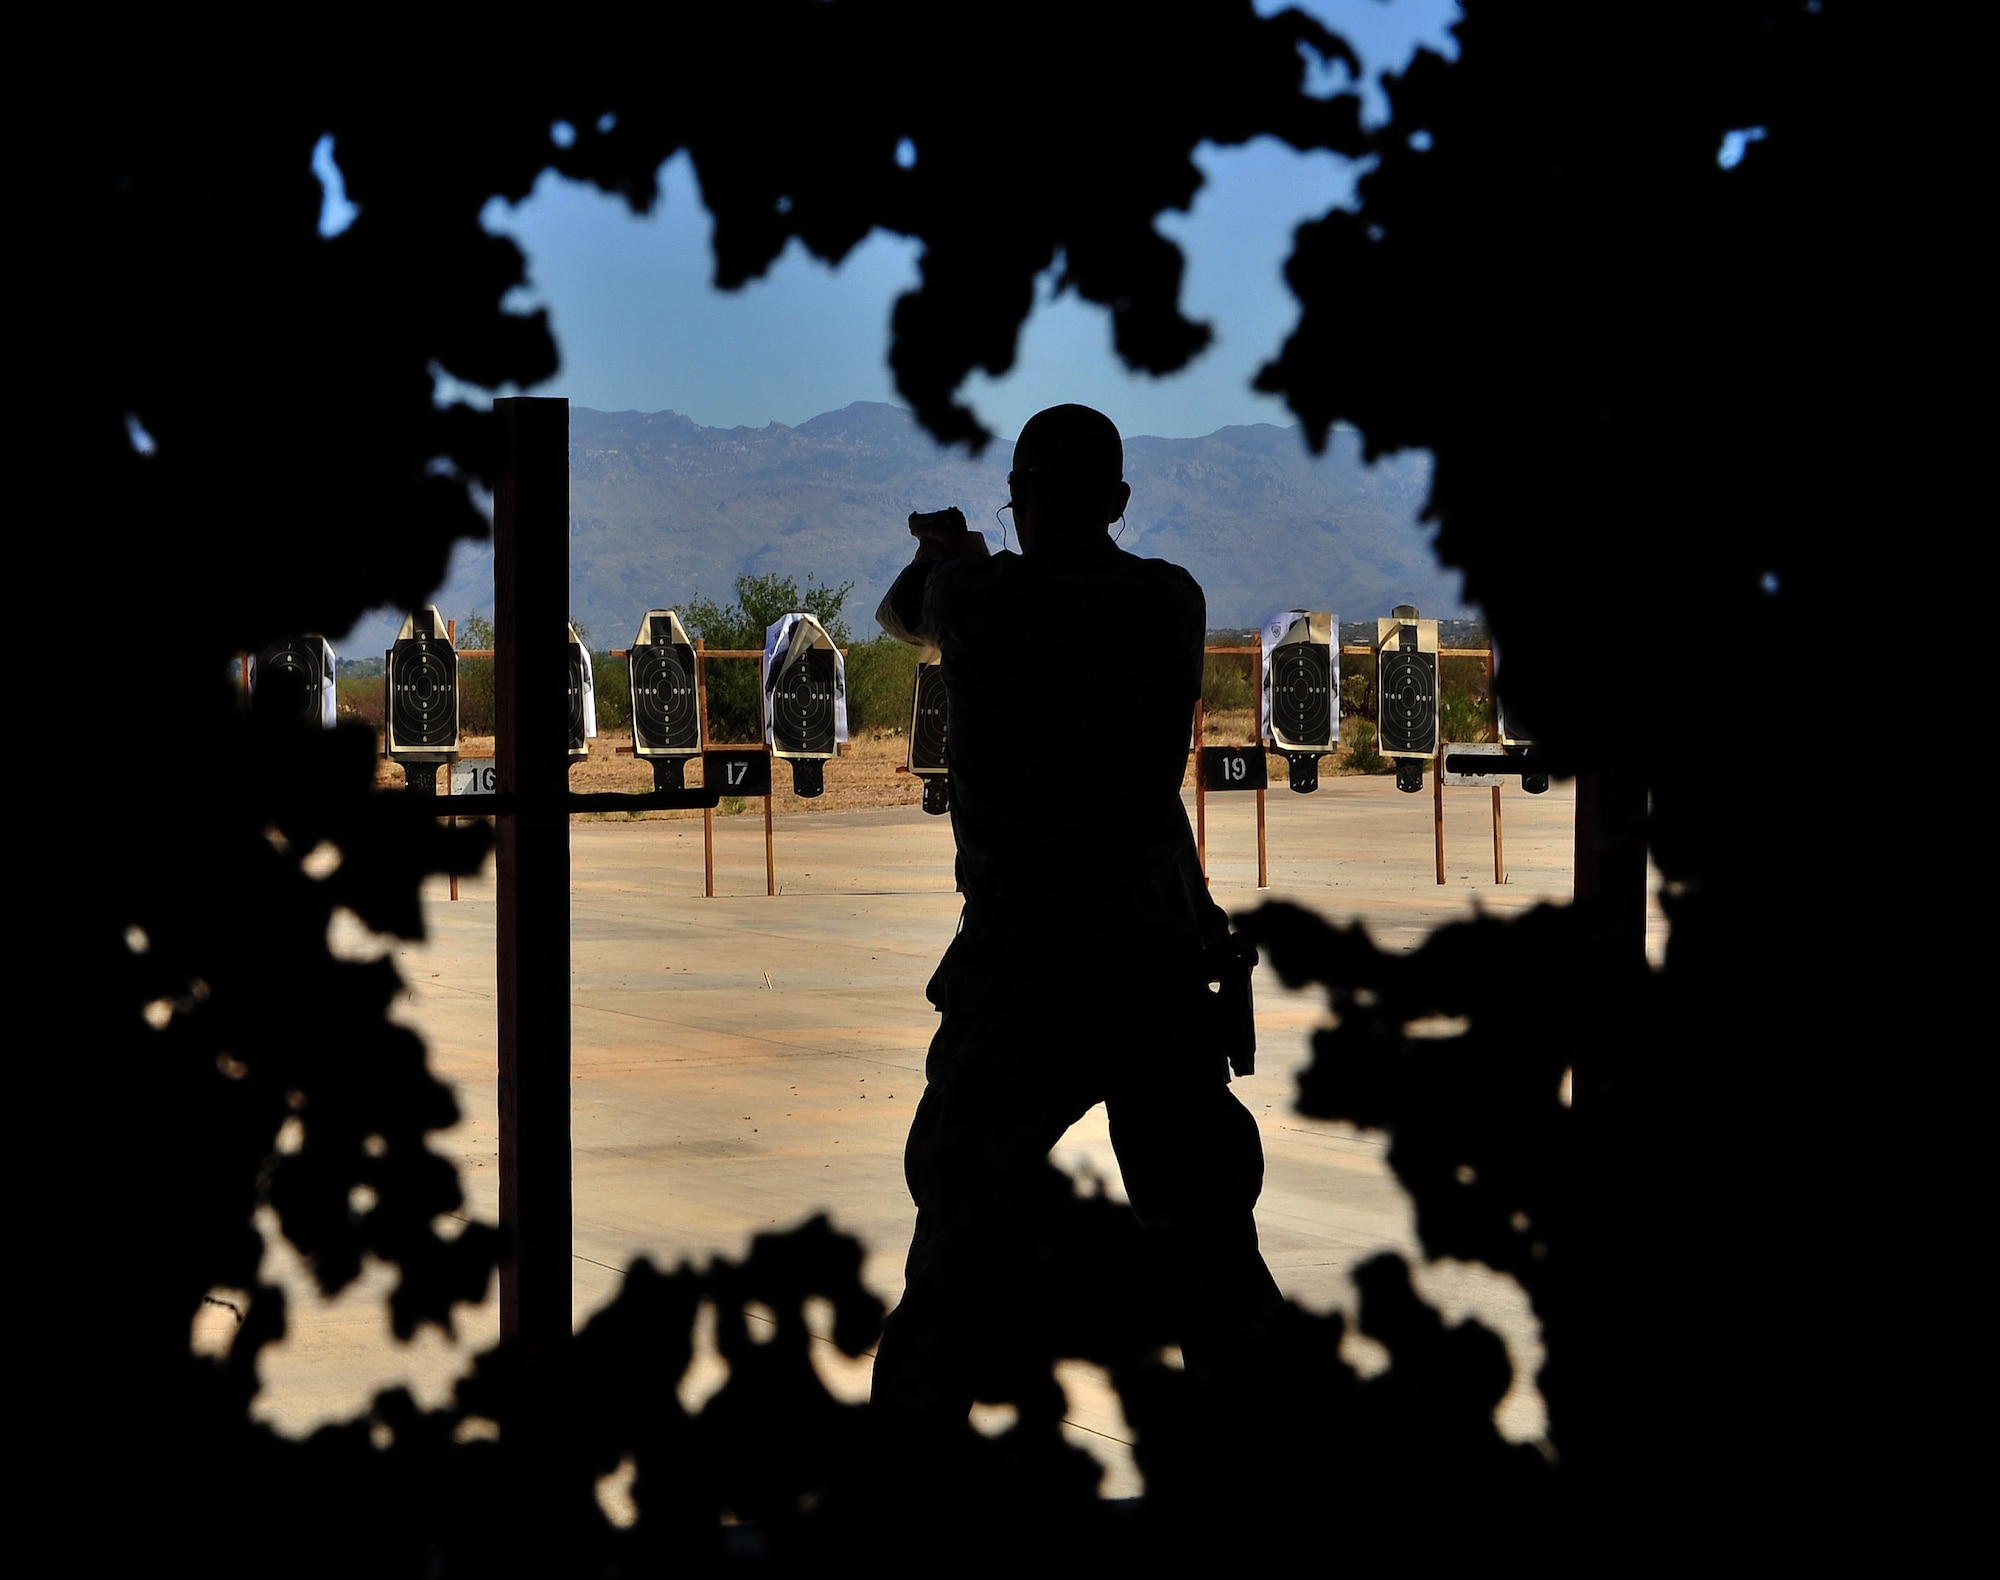 A contestants fires off rounds during the shooting competion at Davis-Monthan Air Force Base, Ariz., May 17, 2013. The competion is part of national Police Week.(U.S. Air Force Photo by Airman 1st Class Josh Slavin)